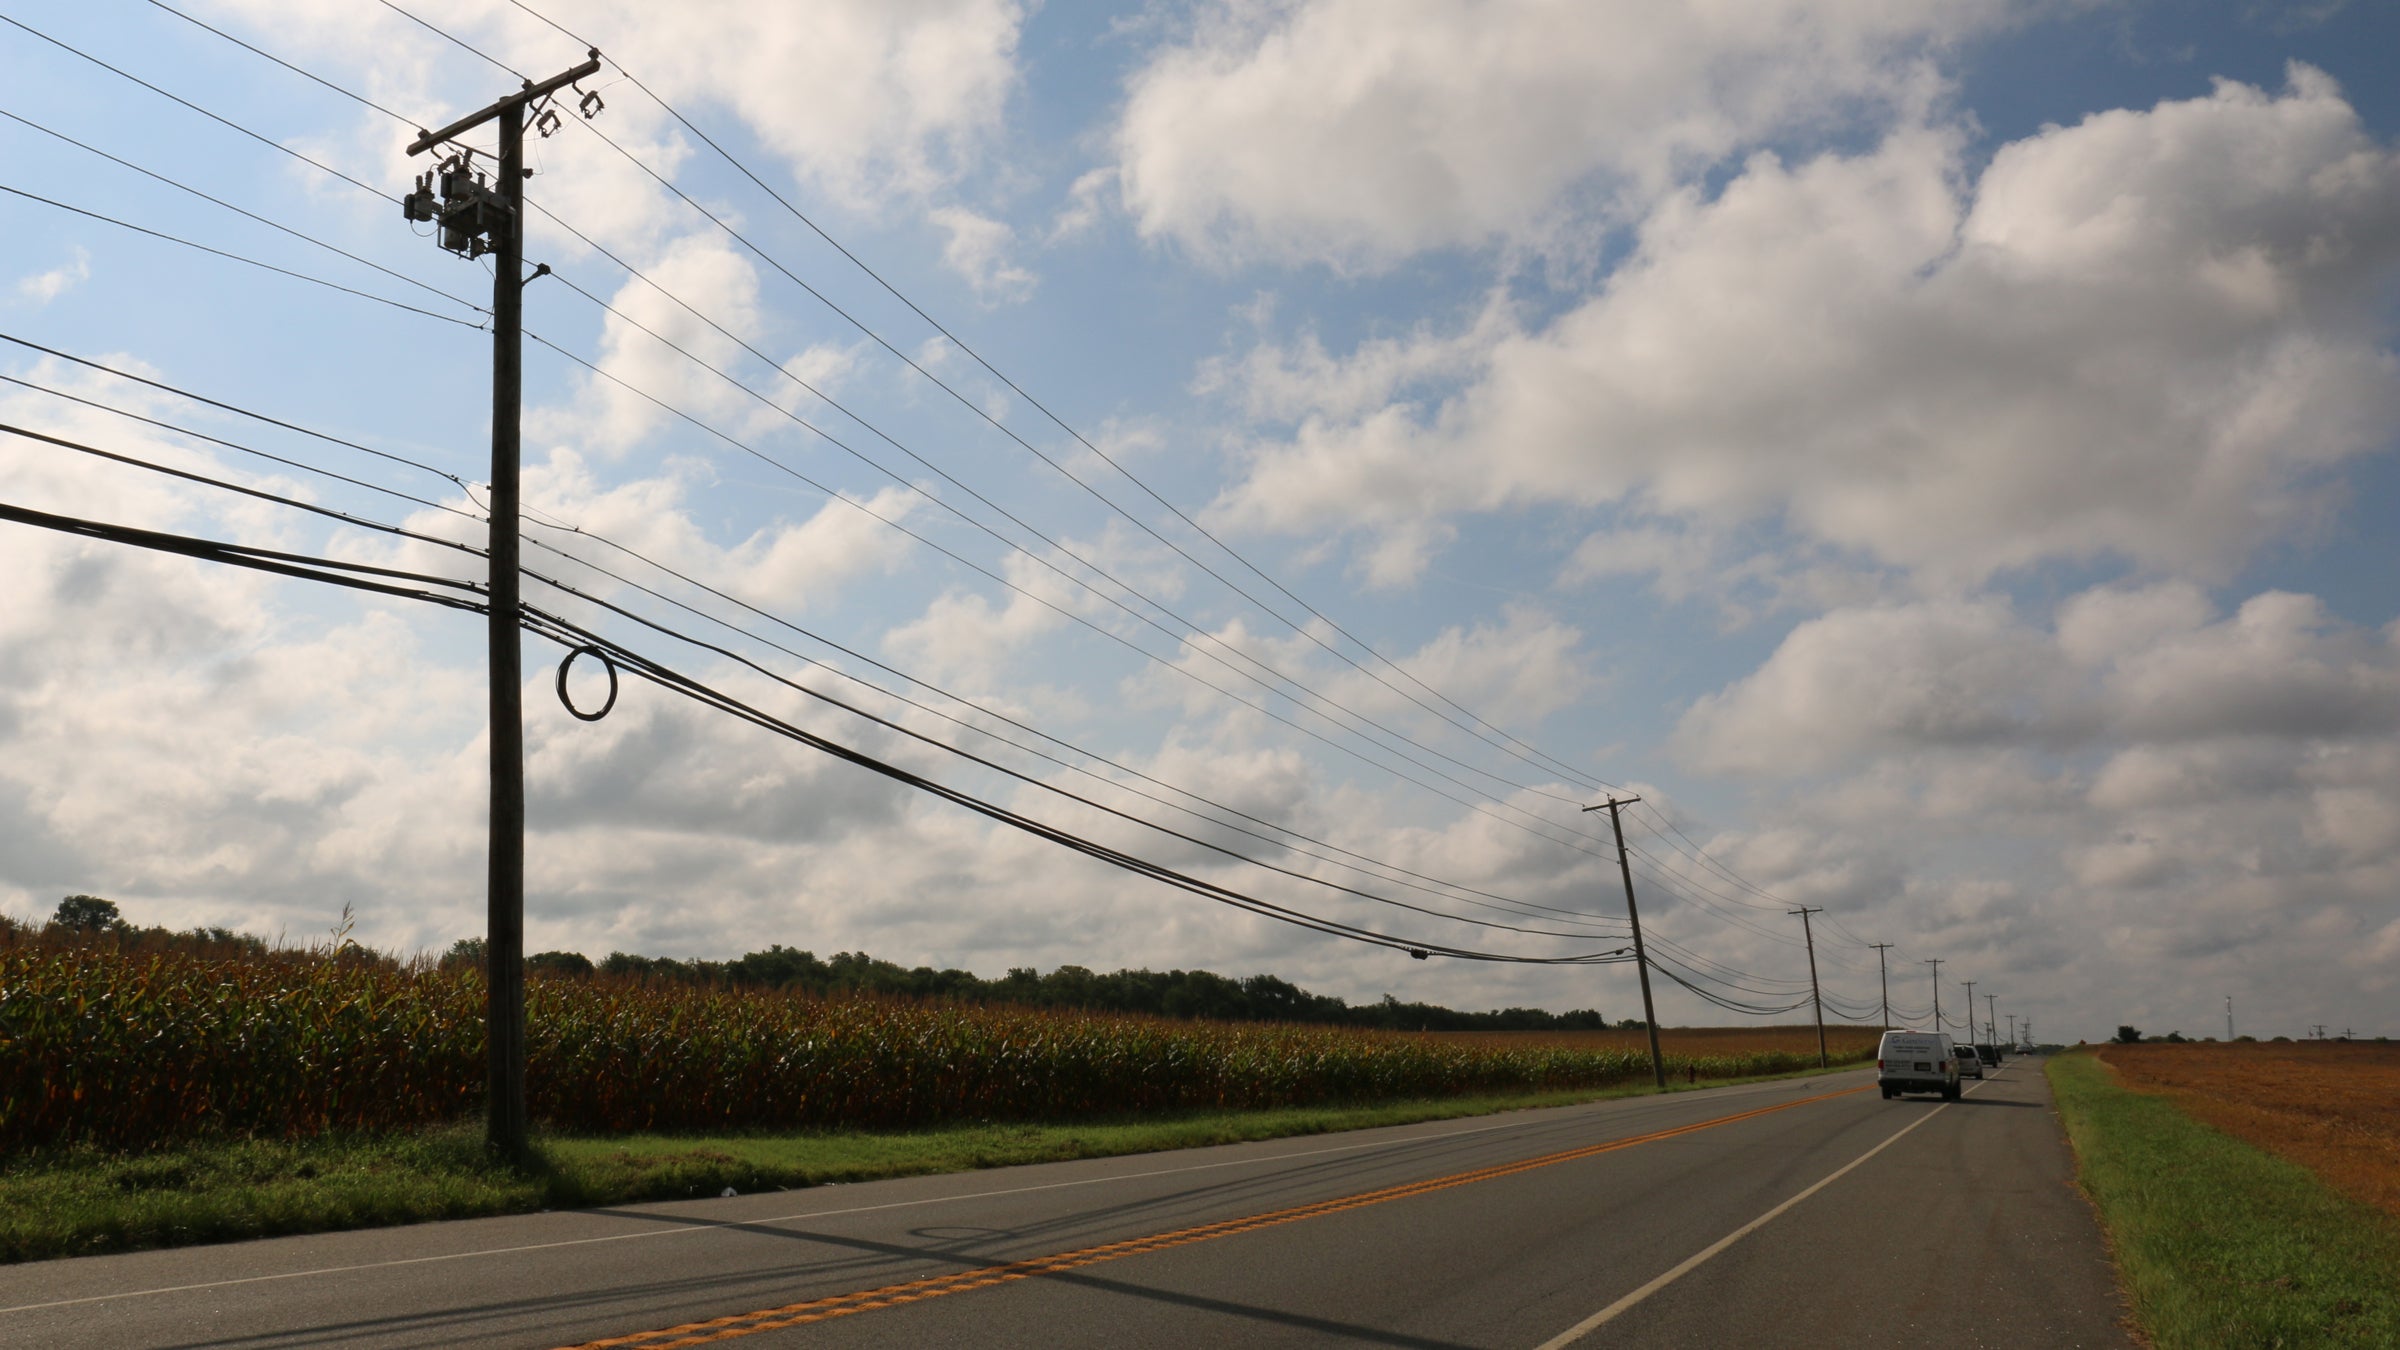  The New Jersey Board of Public Utilities will investigate landline and broadband reliability problems with Verizon in 16 South Jersey towns. (Joe Hernandez/WHYY) 